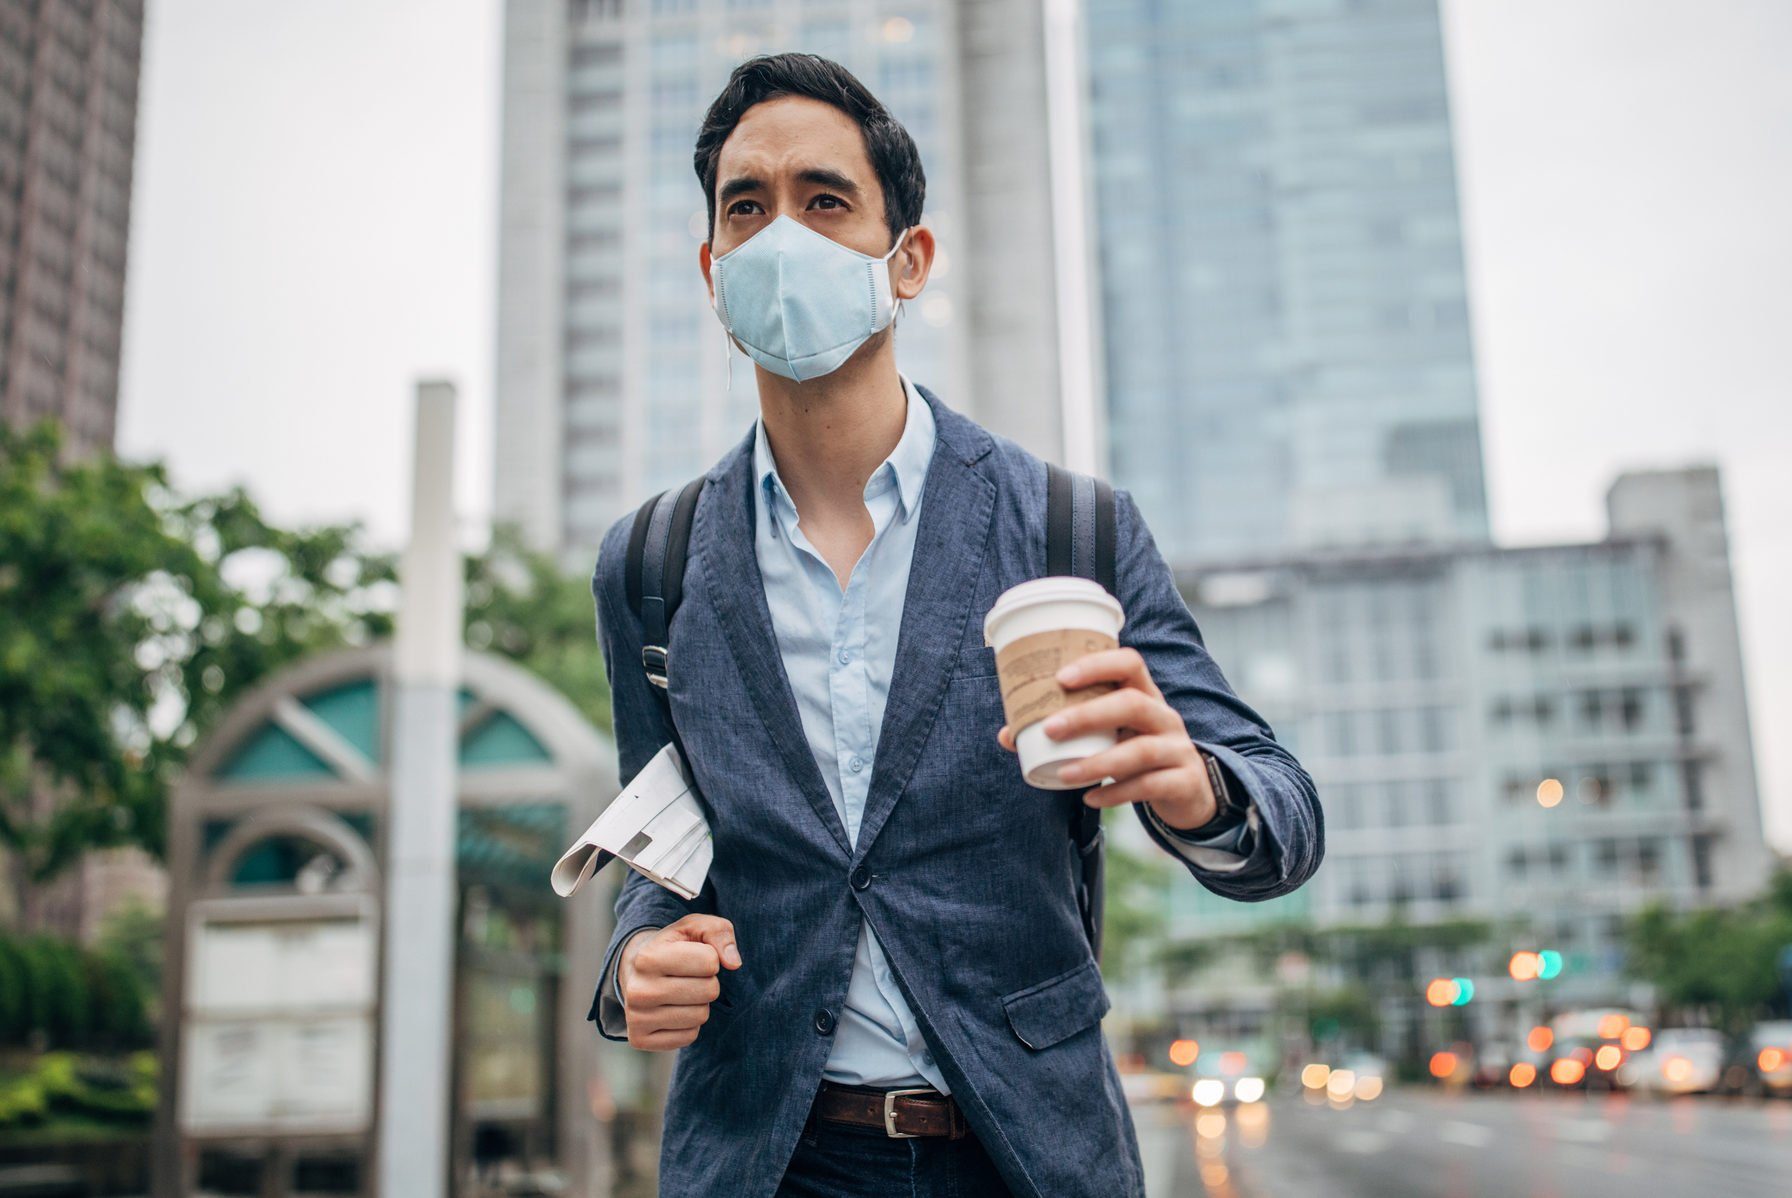 Gentleman with pollution mask in coronavirus infected city downtown